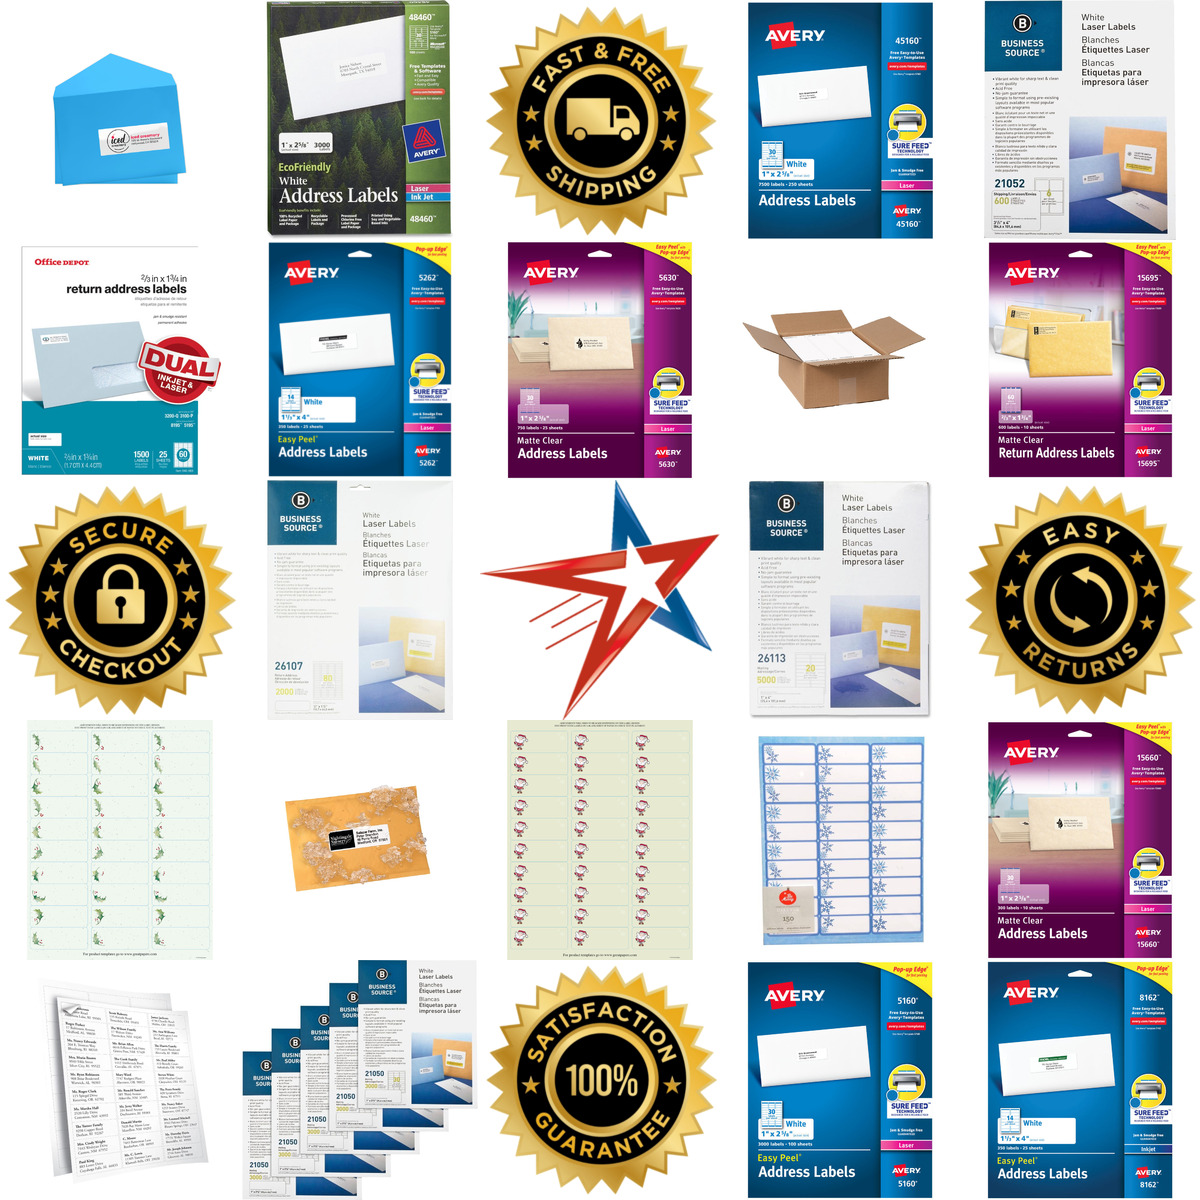 A selection of Address Labels products on GoVets